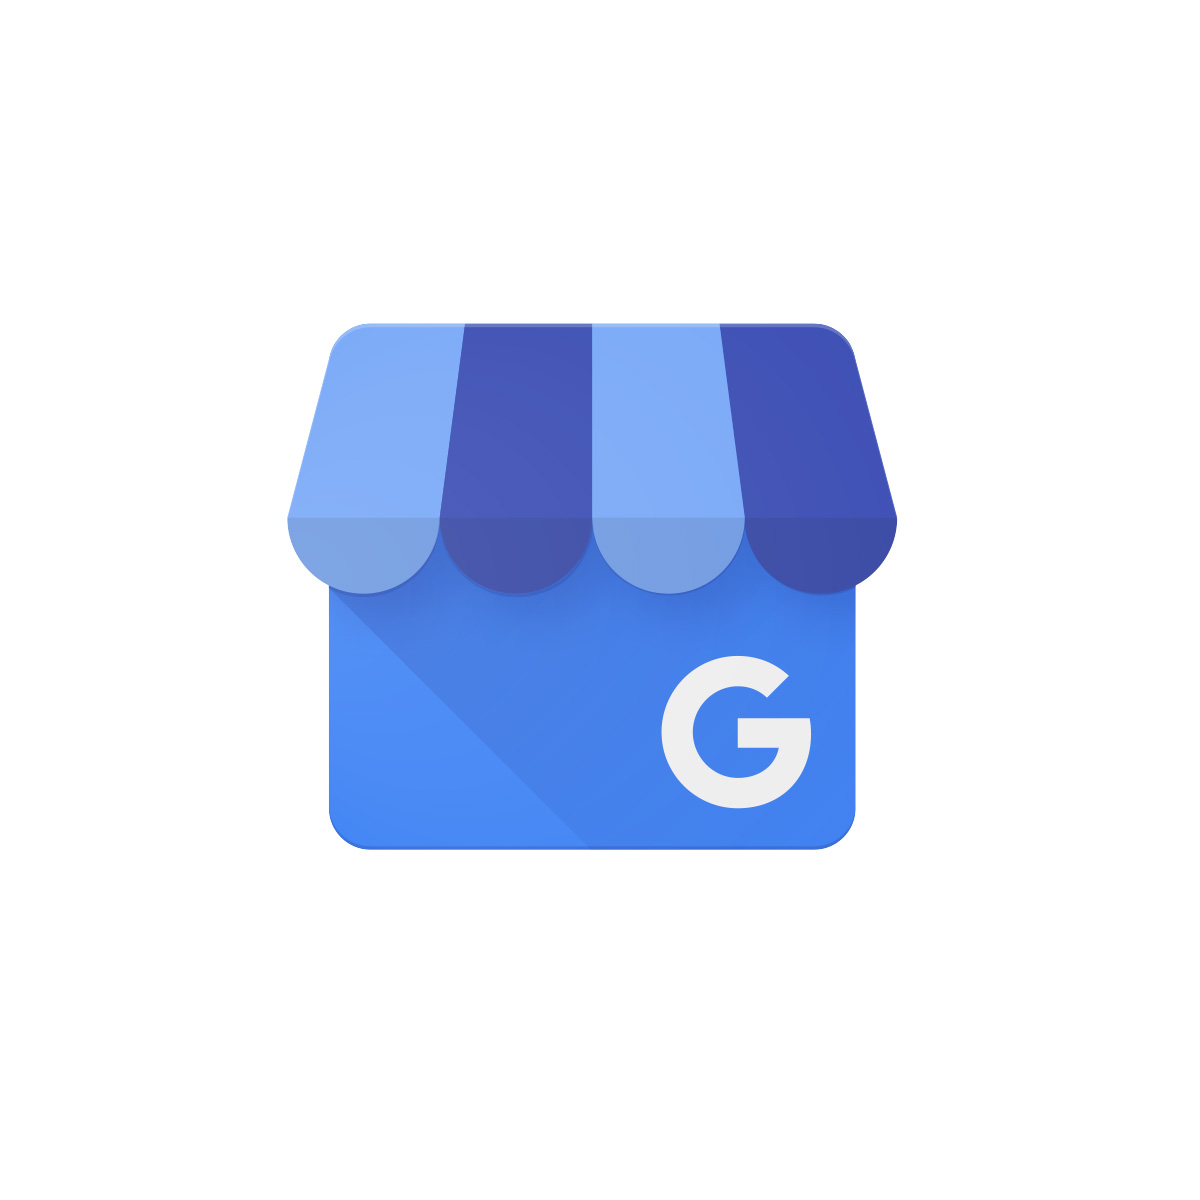 Google My Business Png And Go